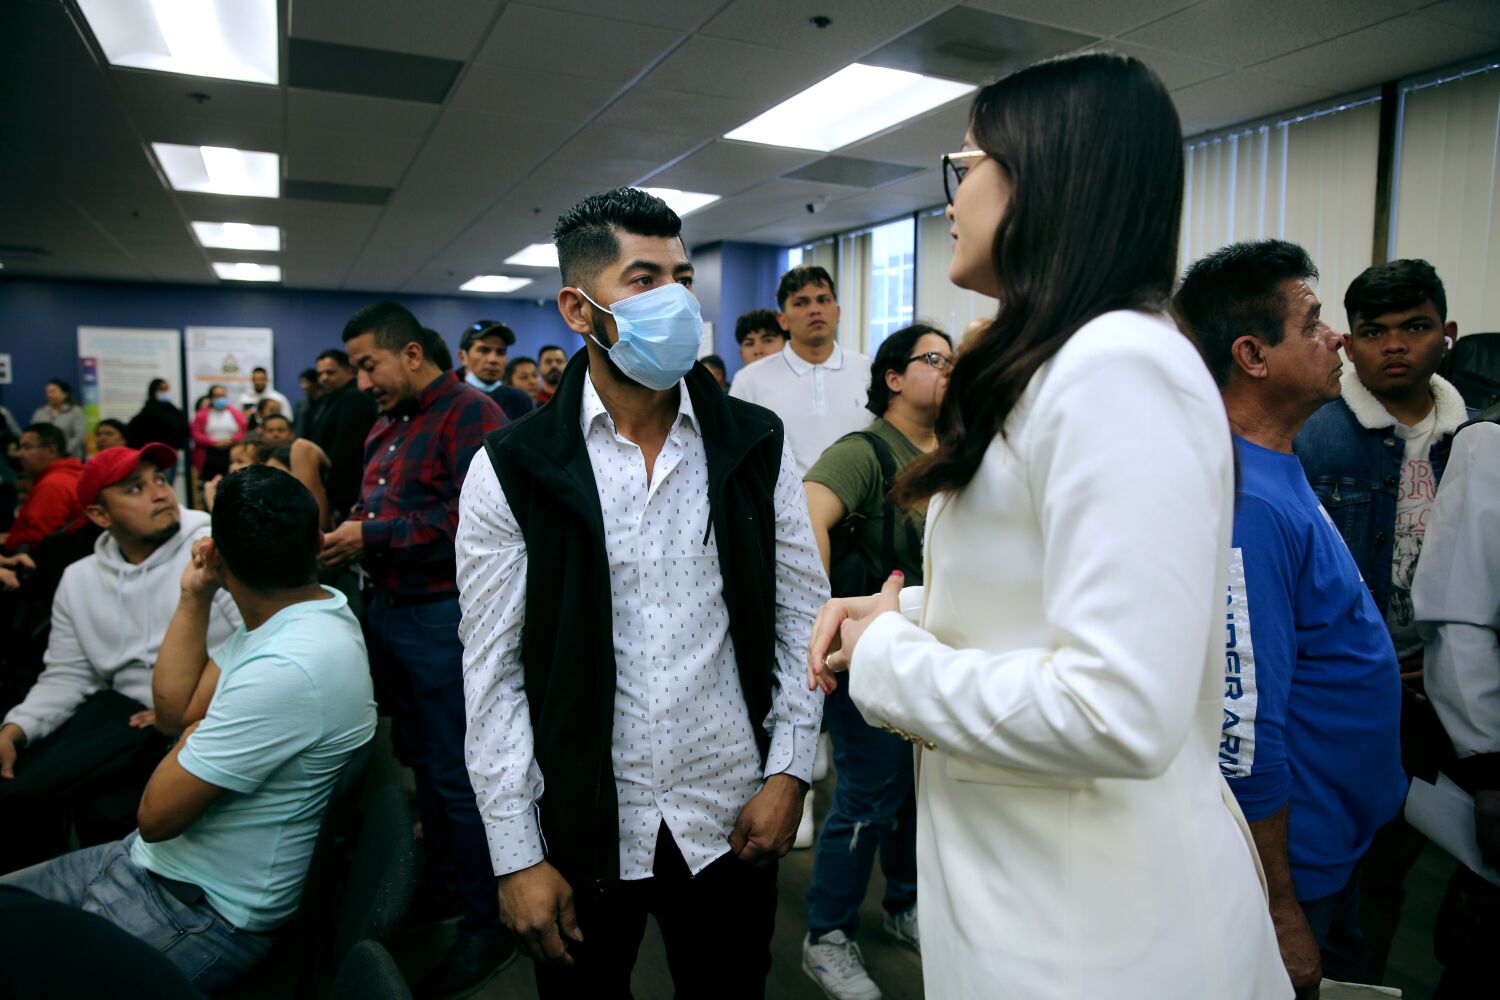 Doctor is the new head of the Honduran Consulate in LA.